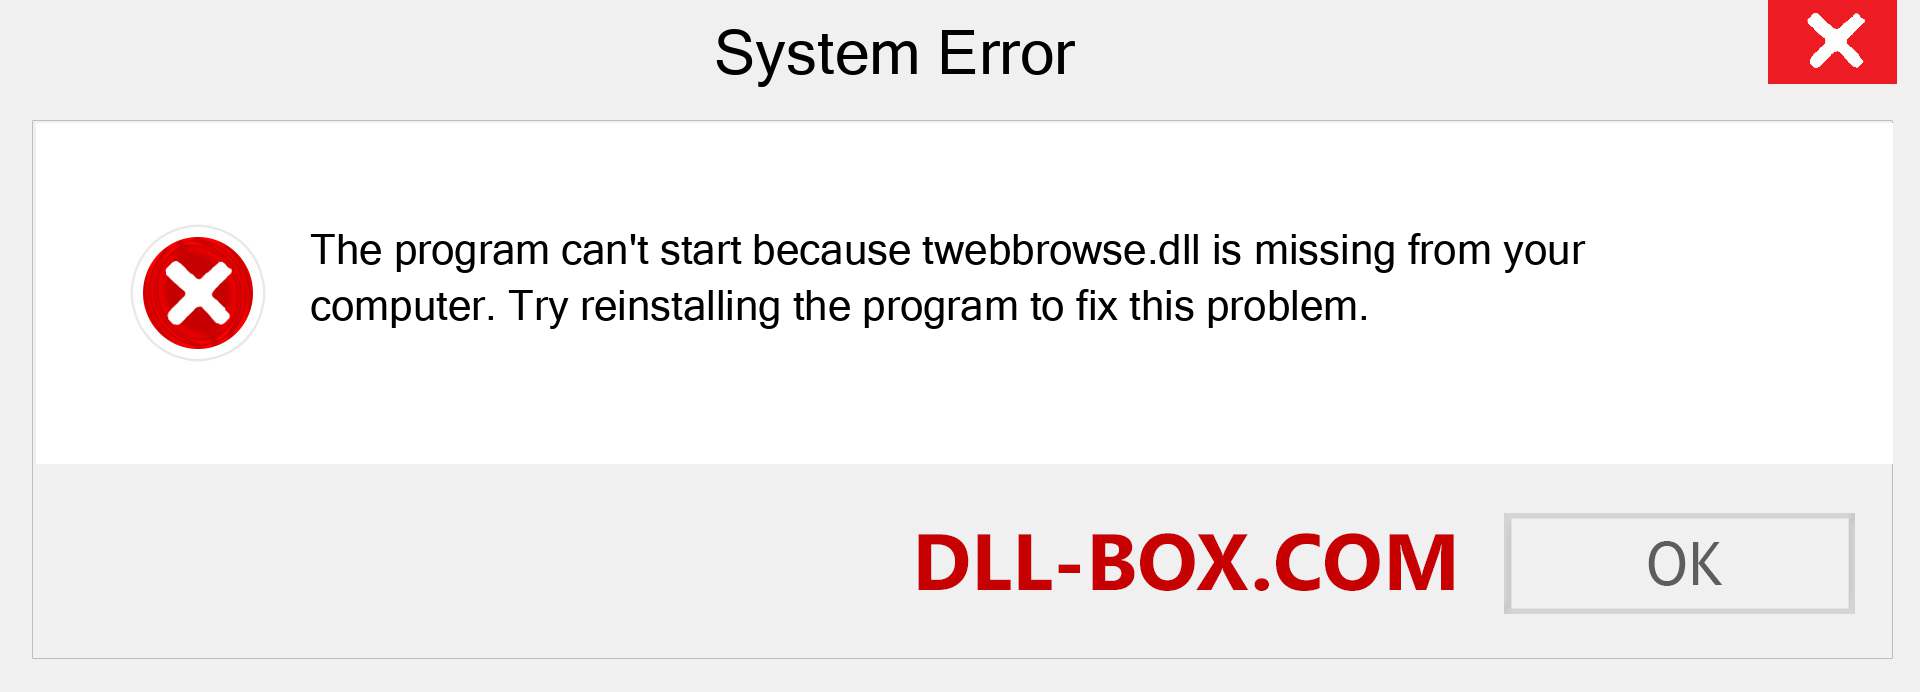  twebbrowse.dll file is missing?. Download for Windows 7, 8, 10 - Fix  twebbrowse dll Missing Error on Windows, photos, images